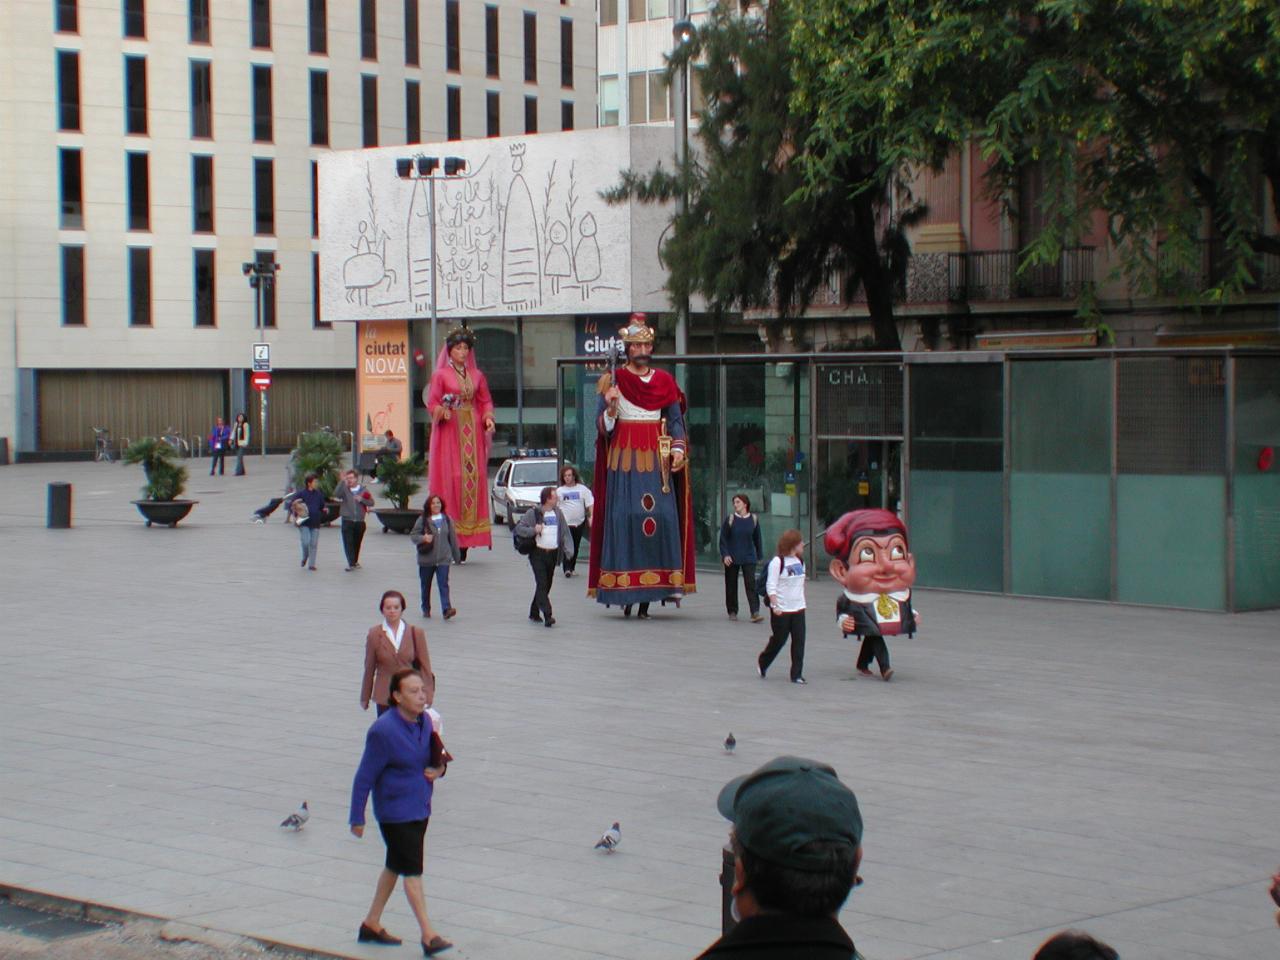 Characters arriving for St. Pilar feast day; building in background decoration by Picasso